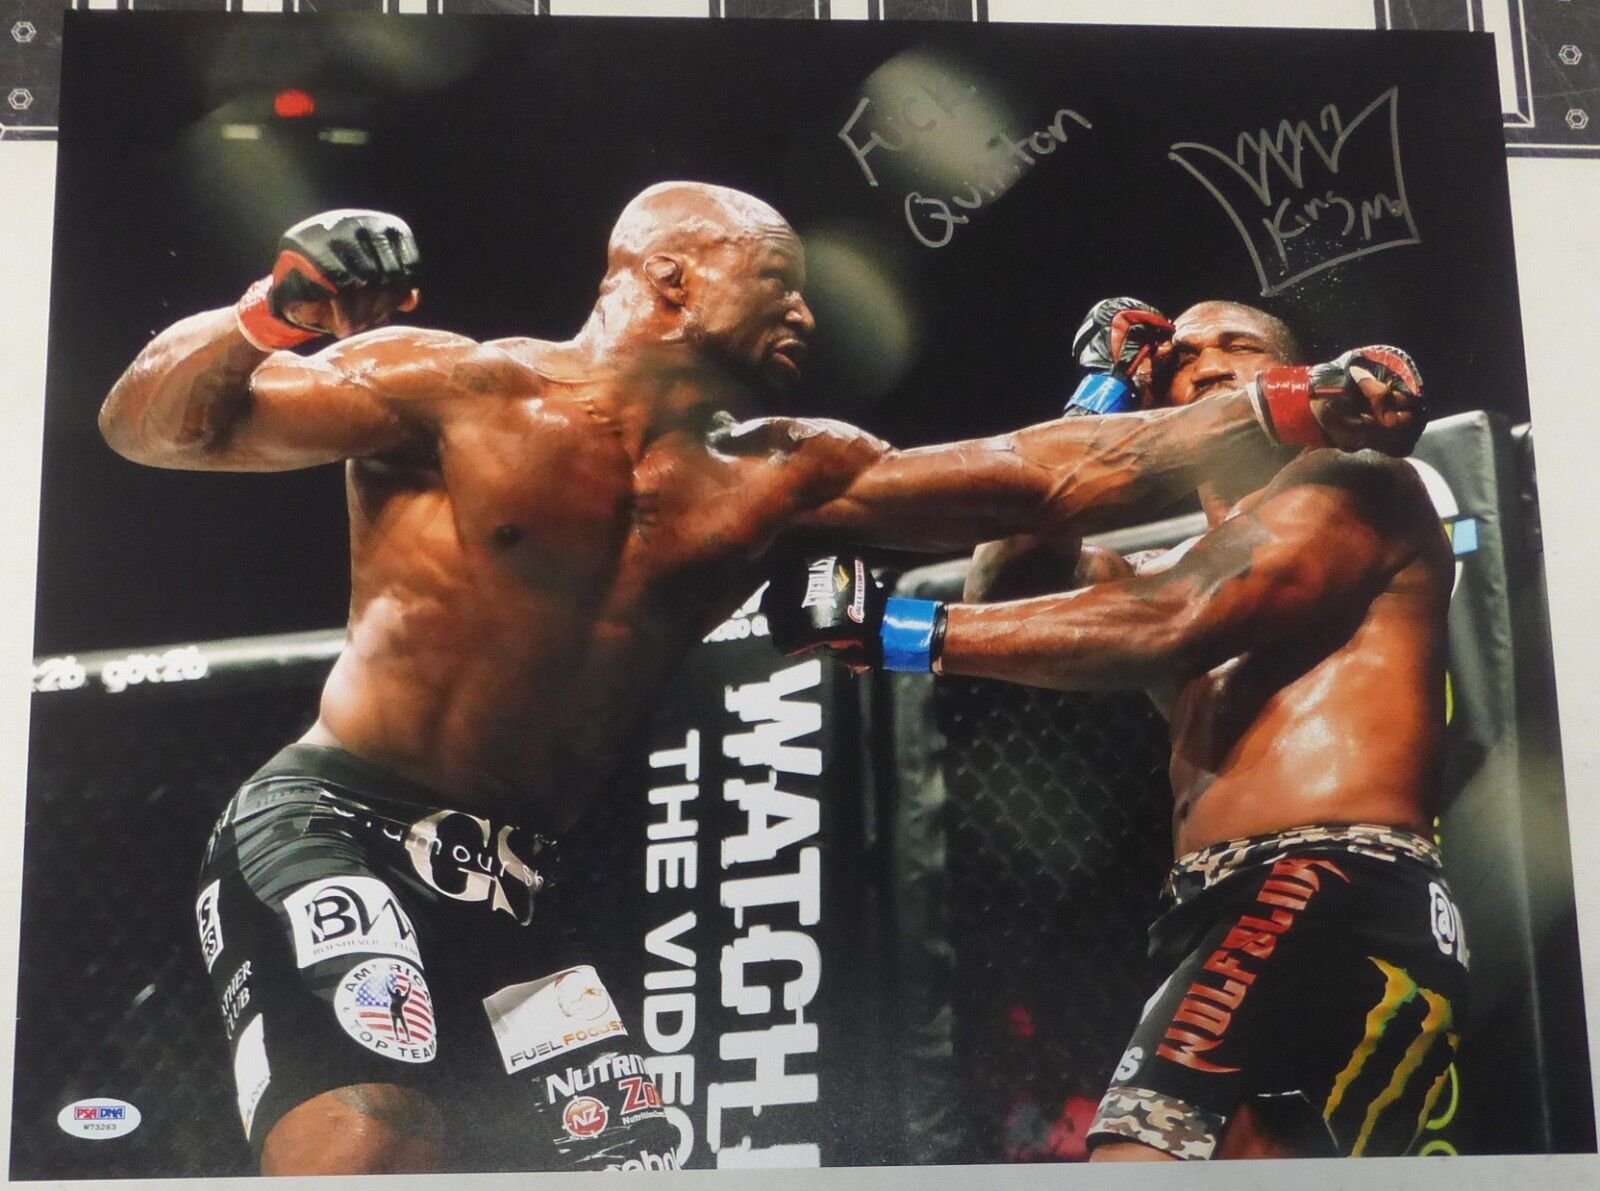 King Mo Signed UFC 16x20 Photo Poster painting PSA/DNA COA Bellator Picture MMA Muhammed Lawal 1